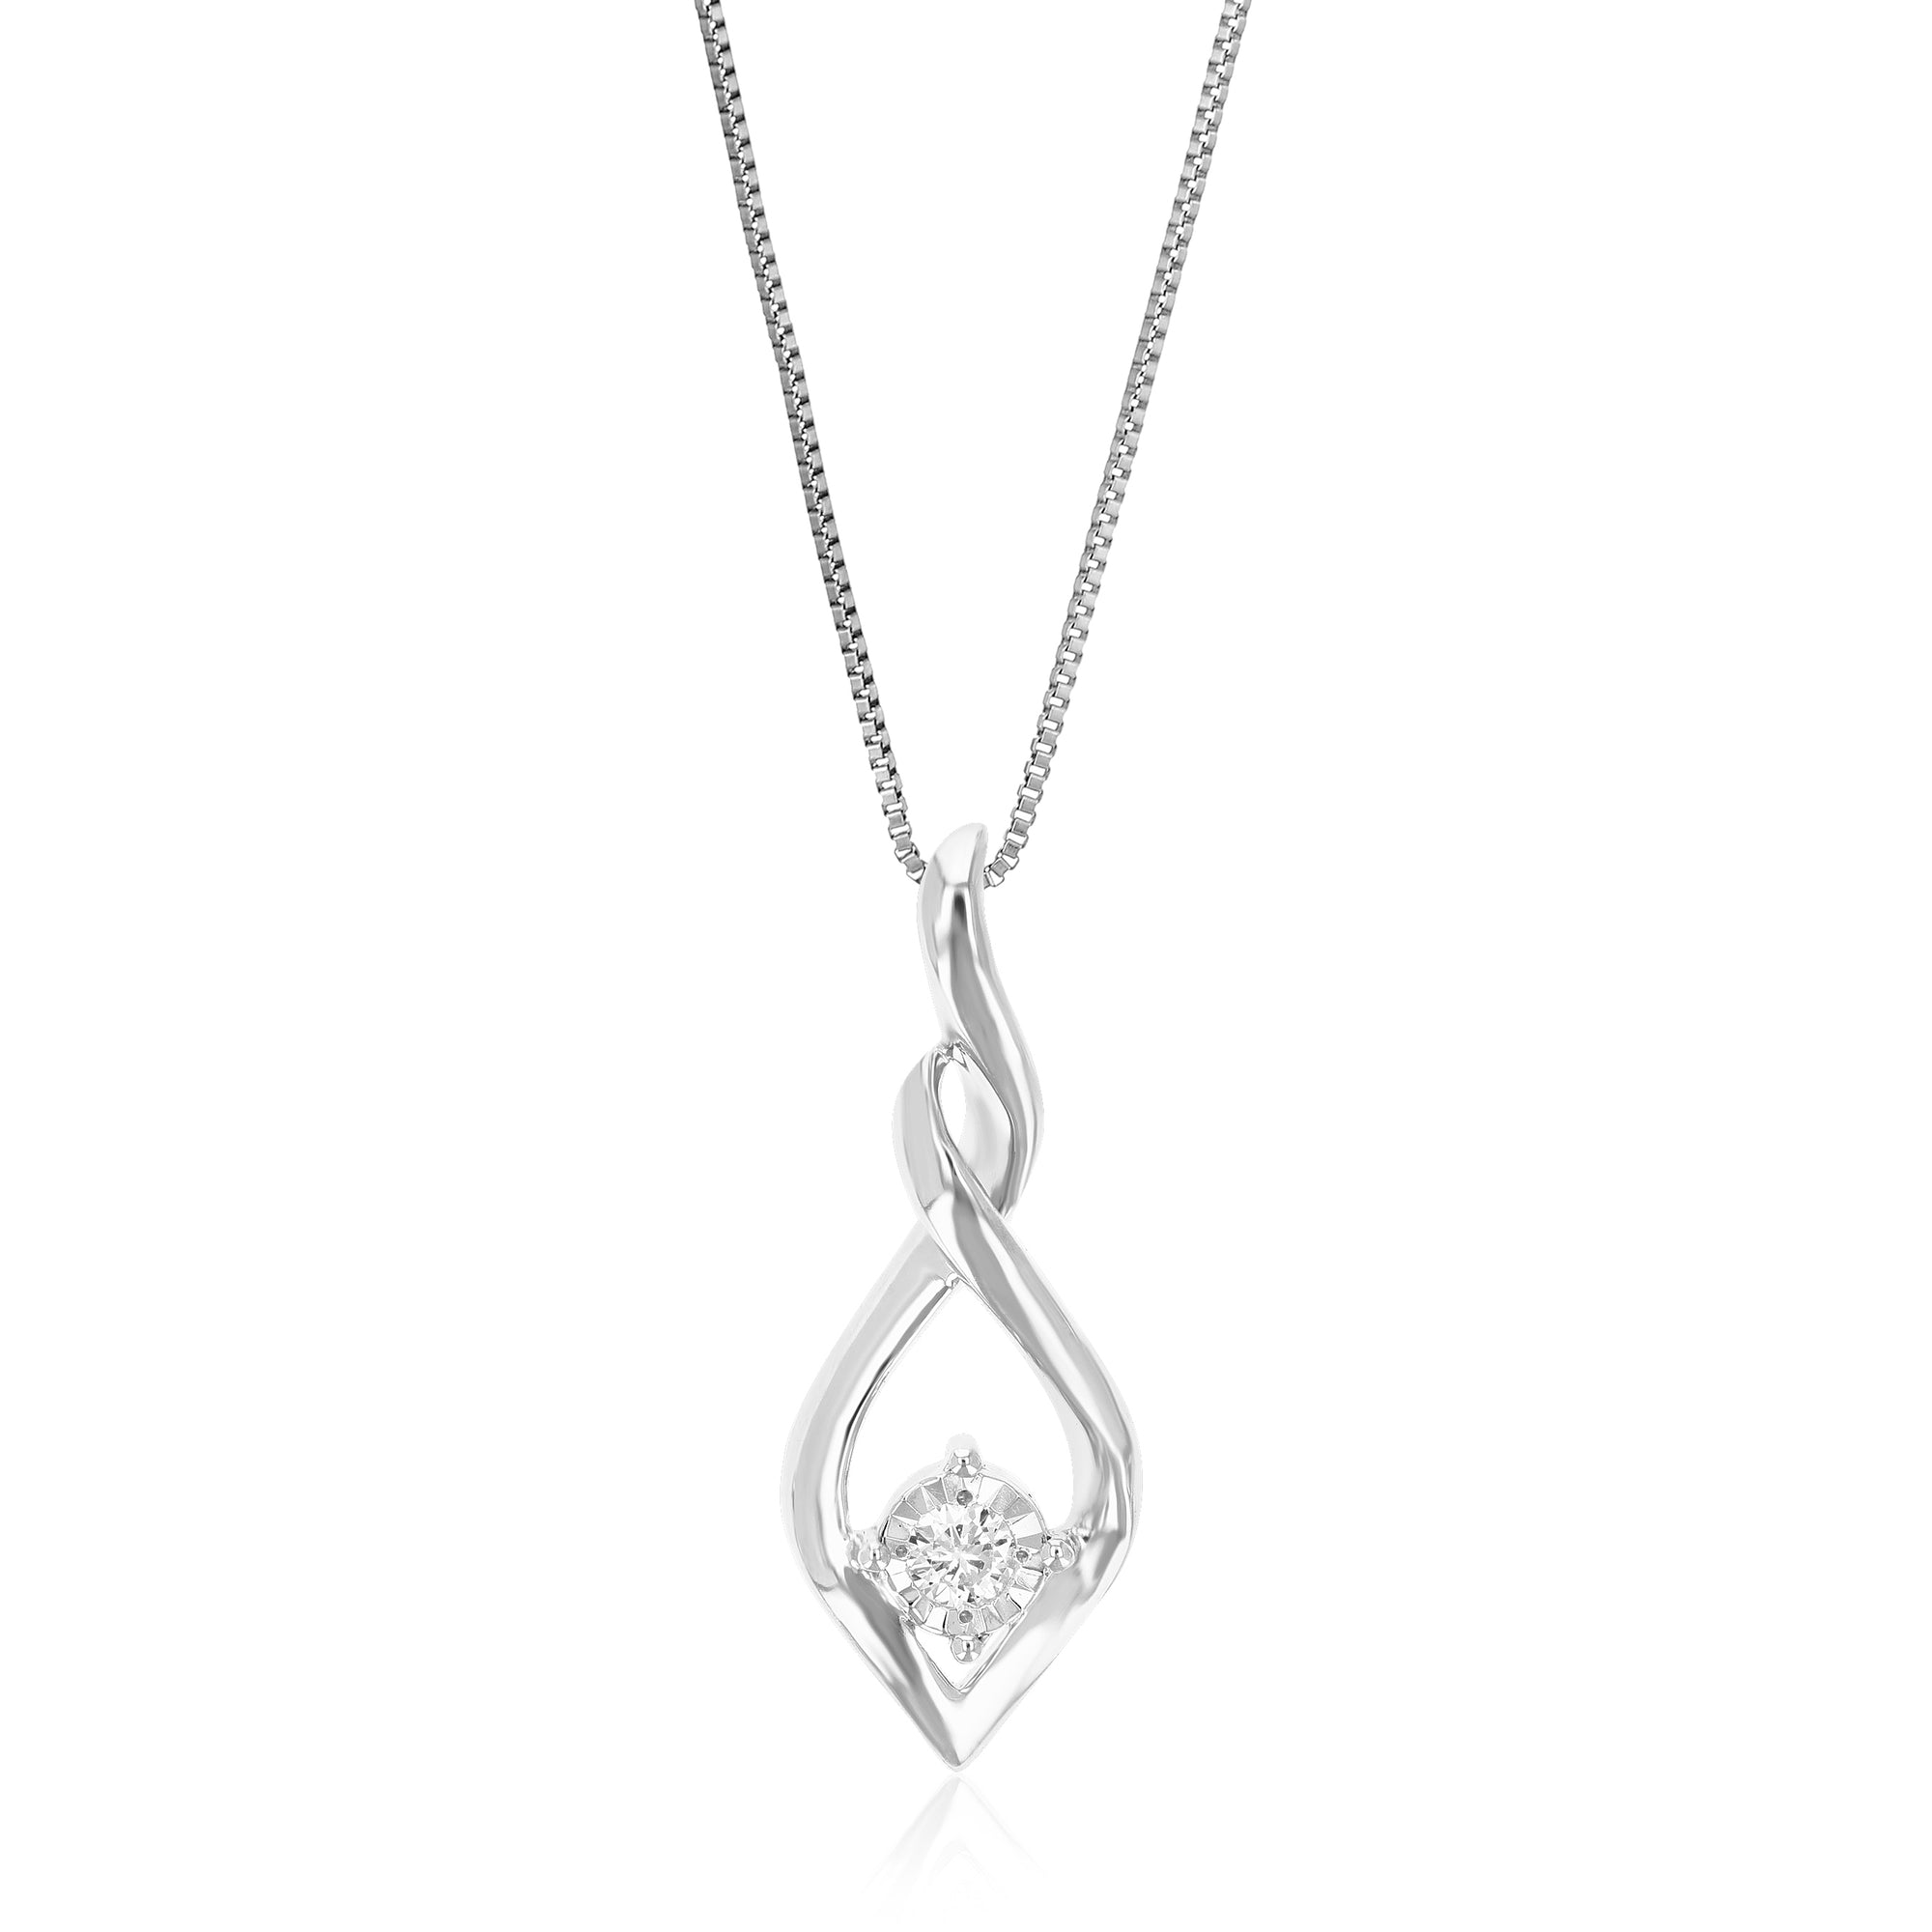 1/16 cttw Diamond Pendant Necklace for Women, Round Lab Grown Diamond Solitaire Pendant Necklace in .925 Sterling Silver with Chain, Size 1/4 Inch